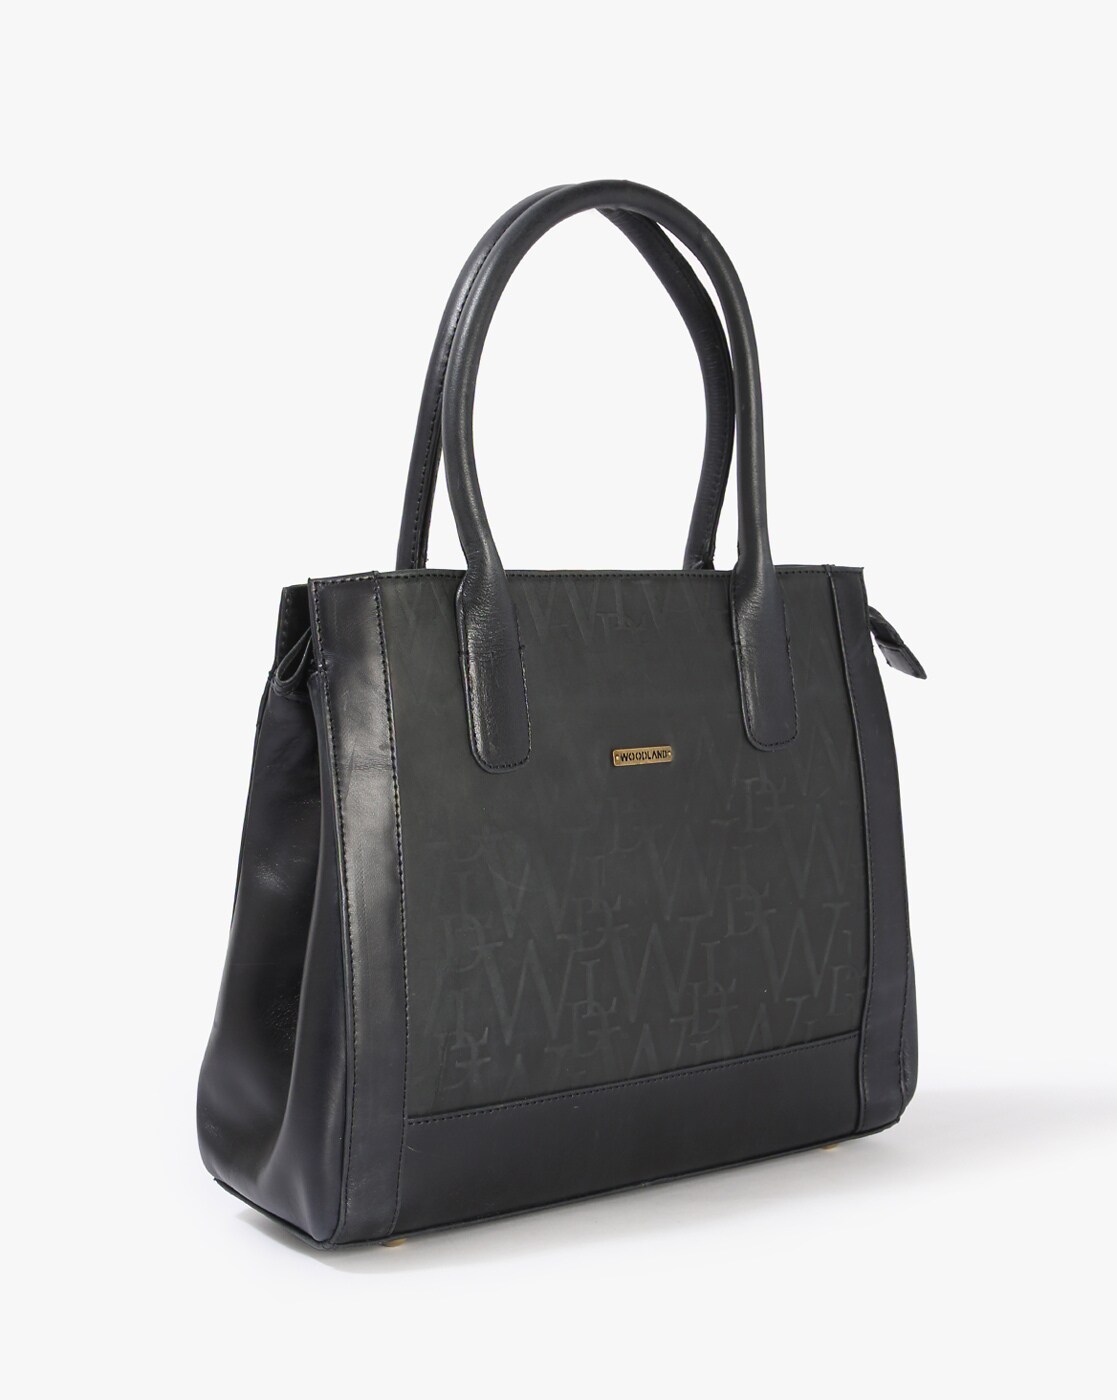 Who makes the best women's leather bags? - Quora